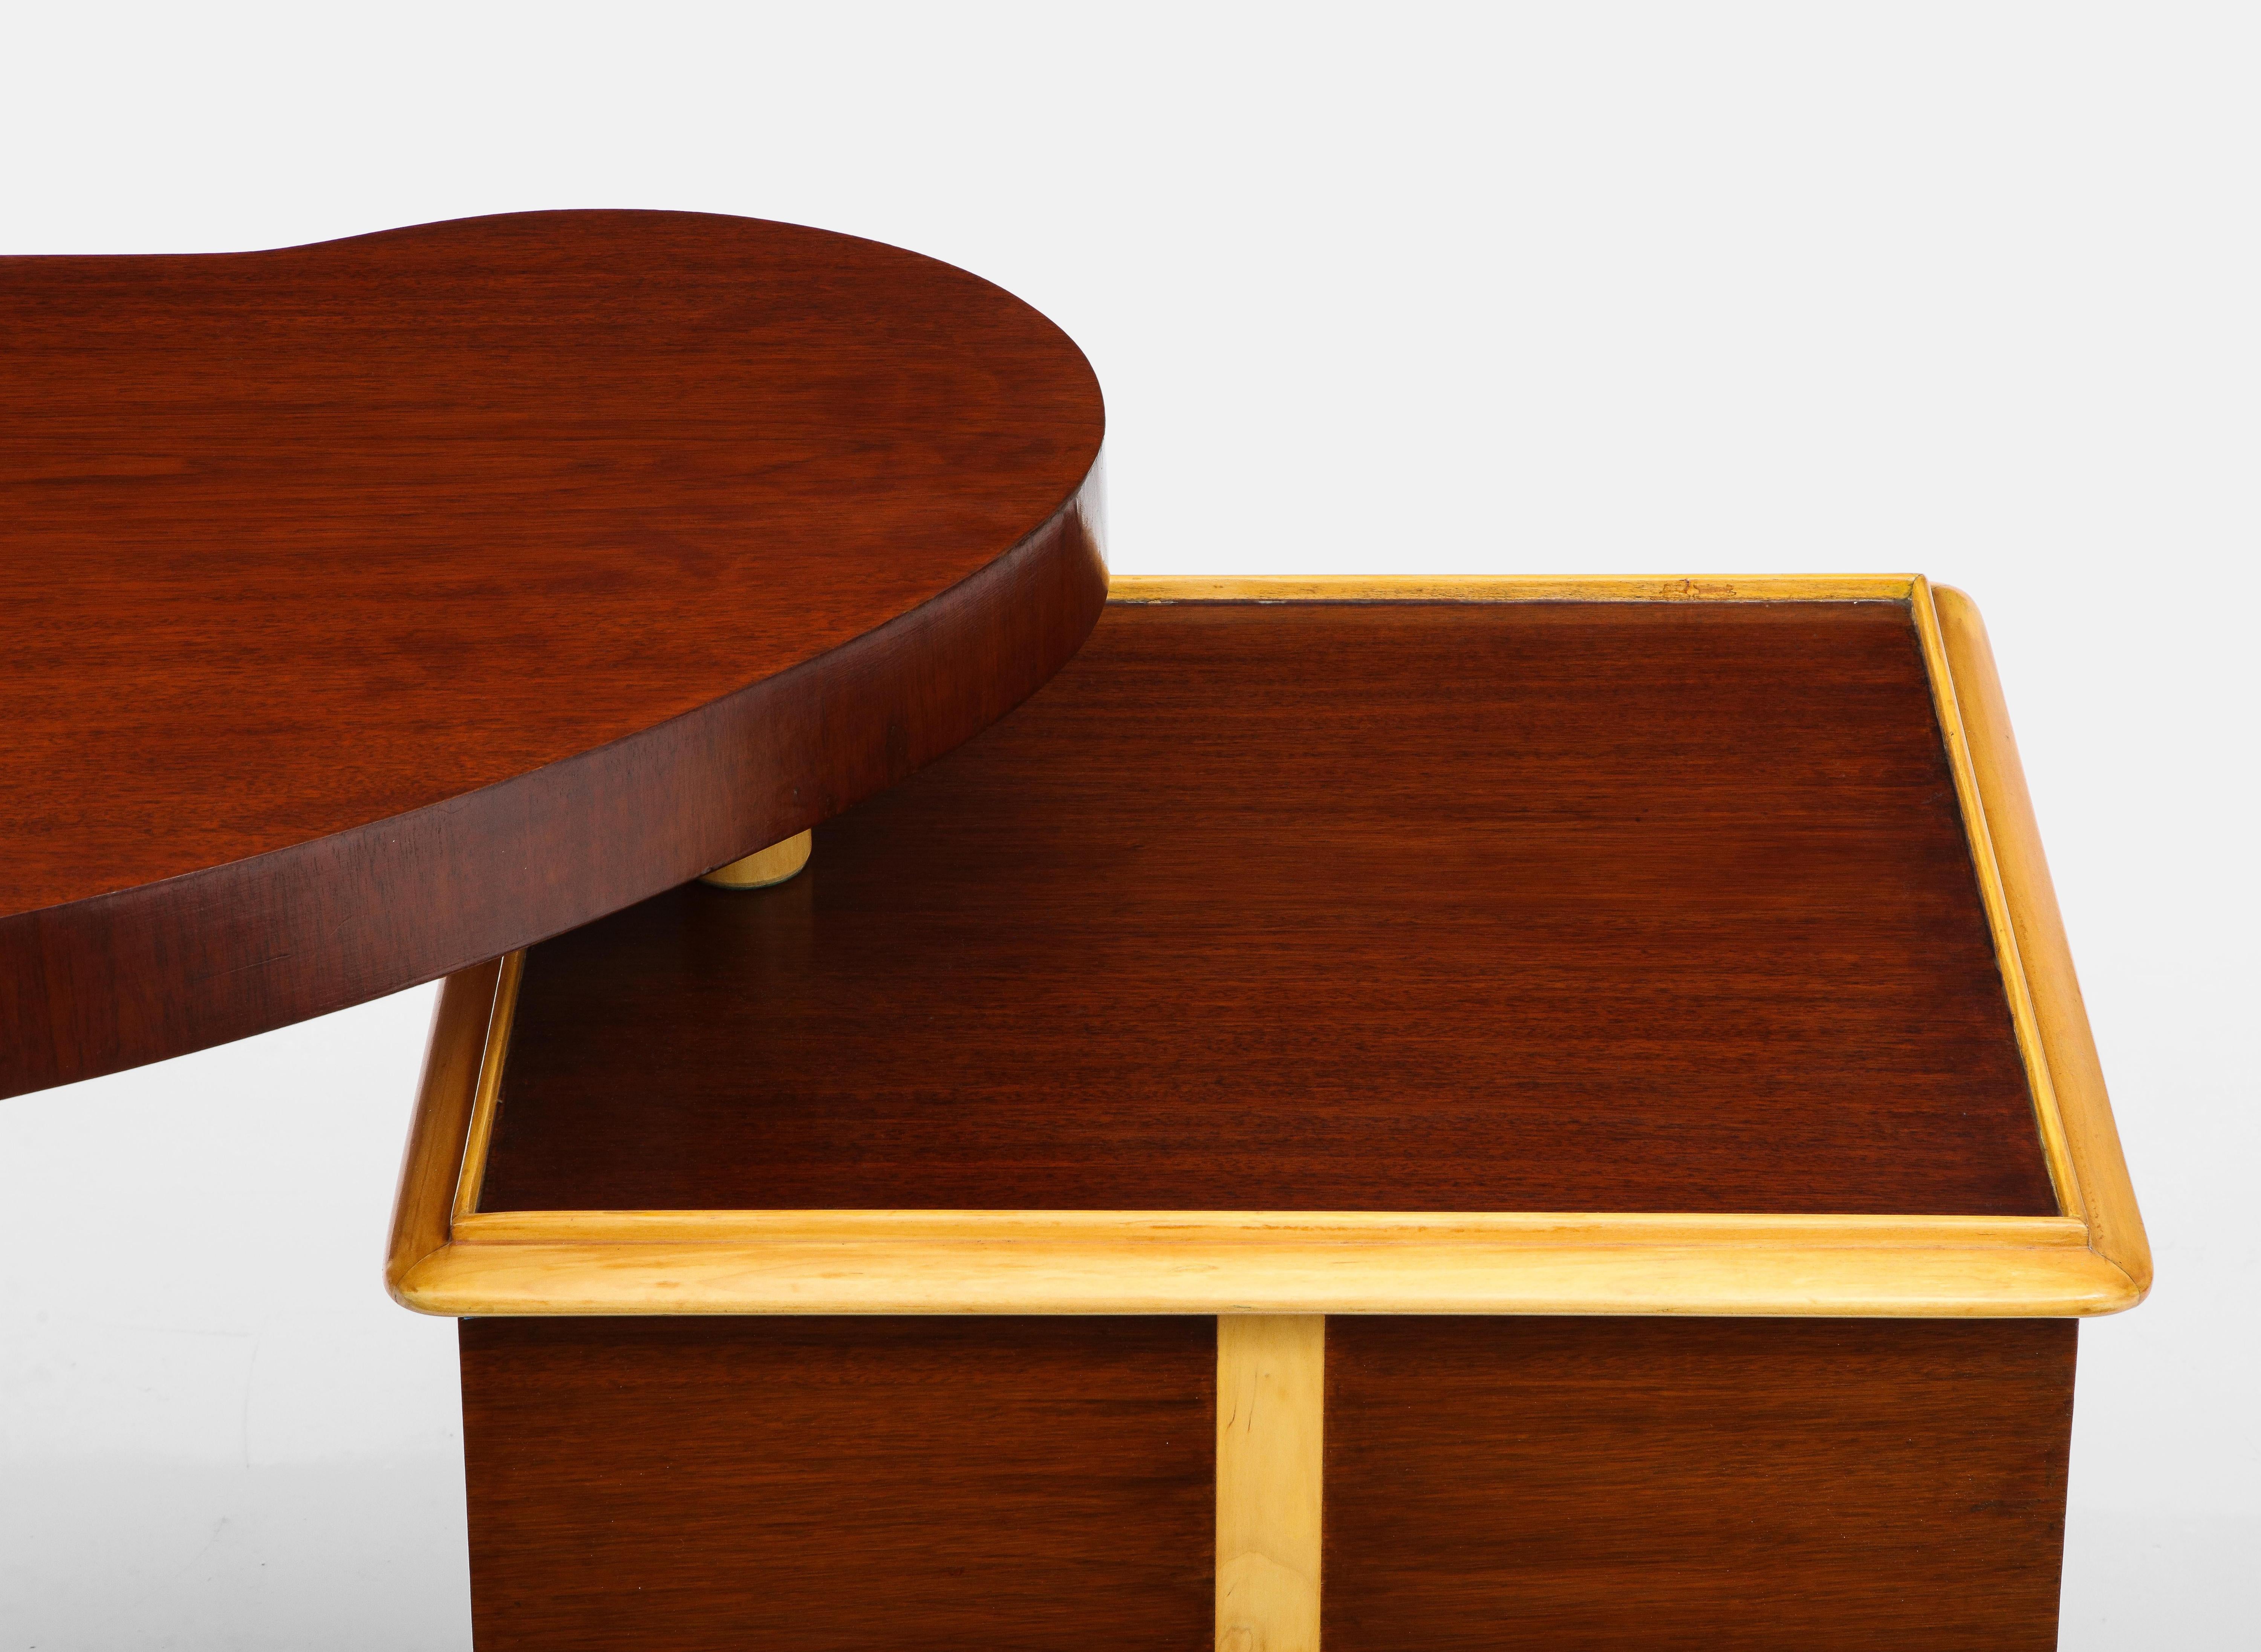 Paul Frankl Rare Kidney Desk in Mahogany, Birch, Leather and Brass, USA, 1950s For Sale 3